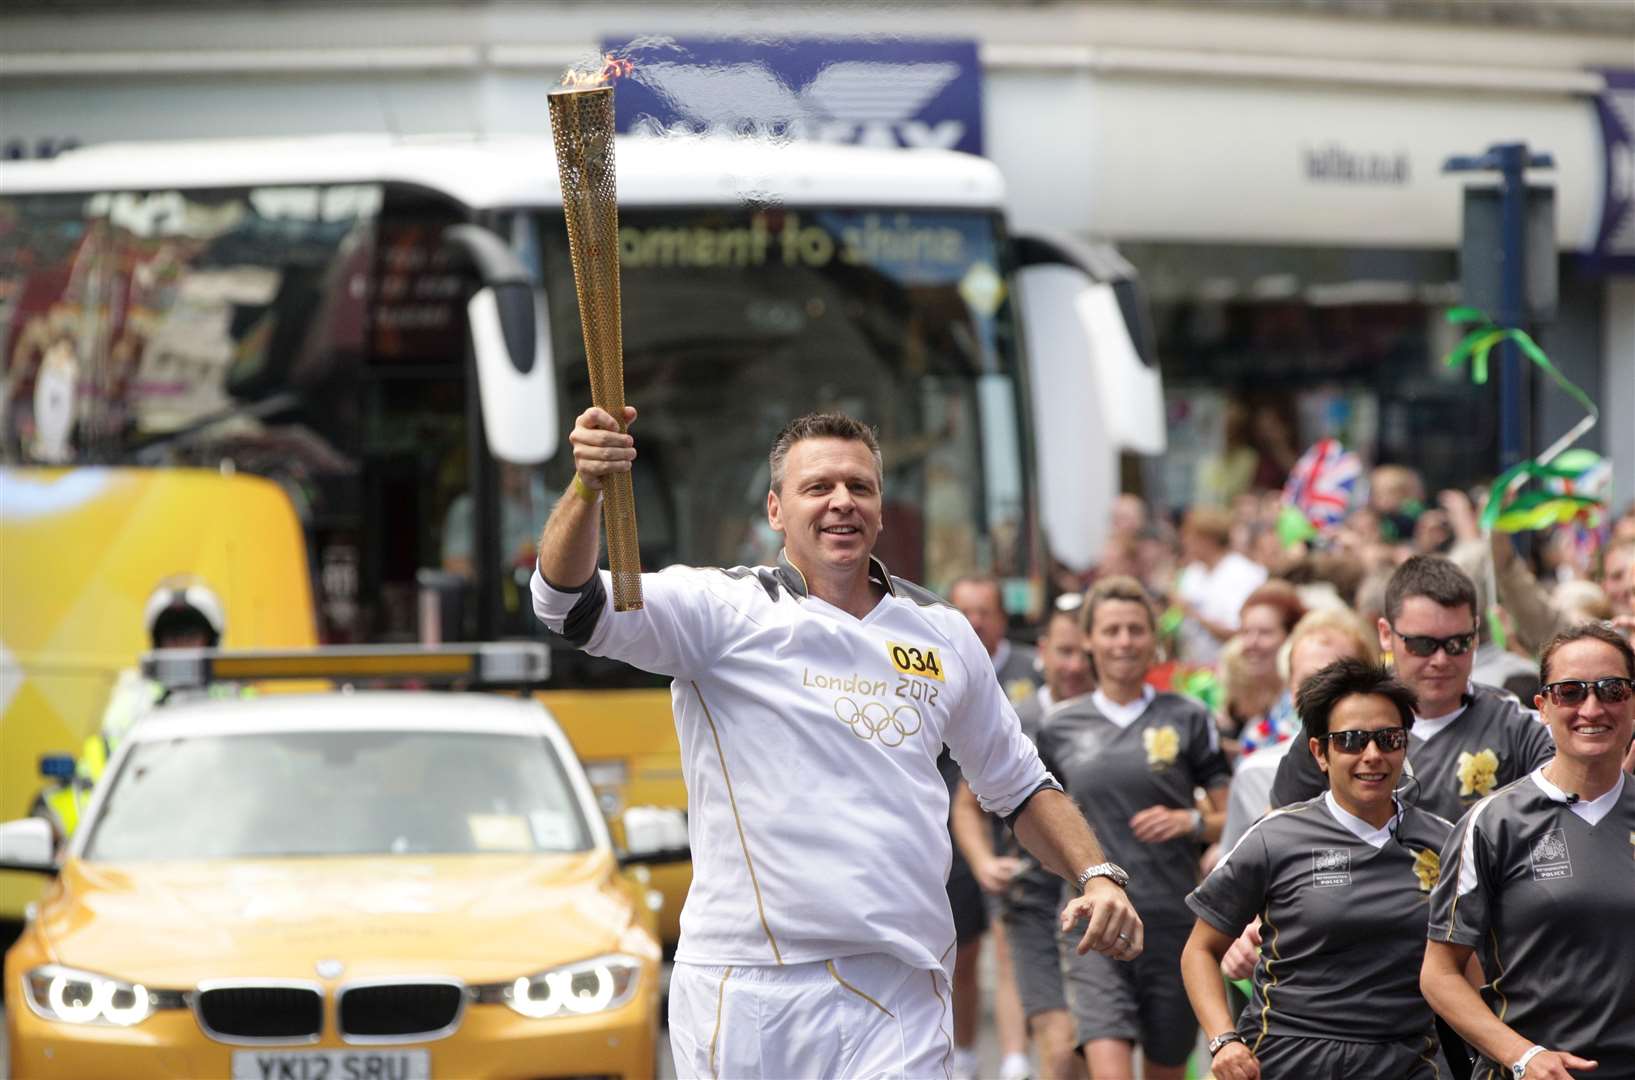 Former Olympian Steve Backley carries the flame at Ramsgate. Pic: Locog